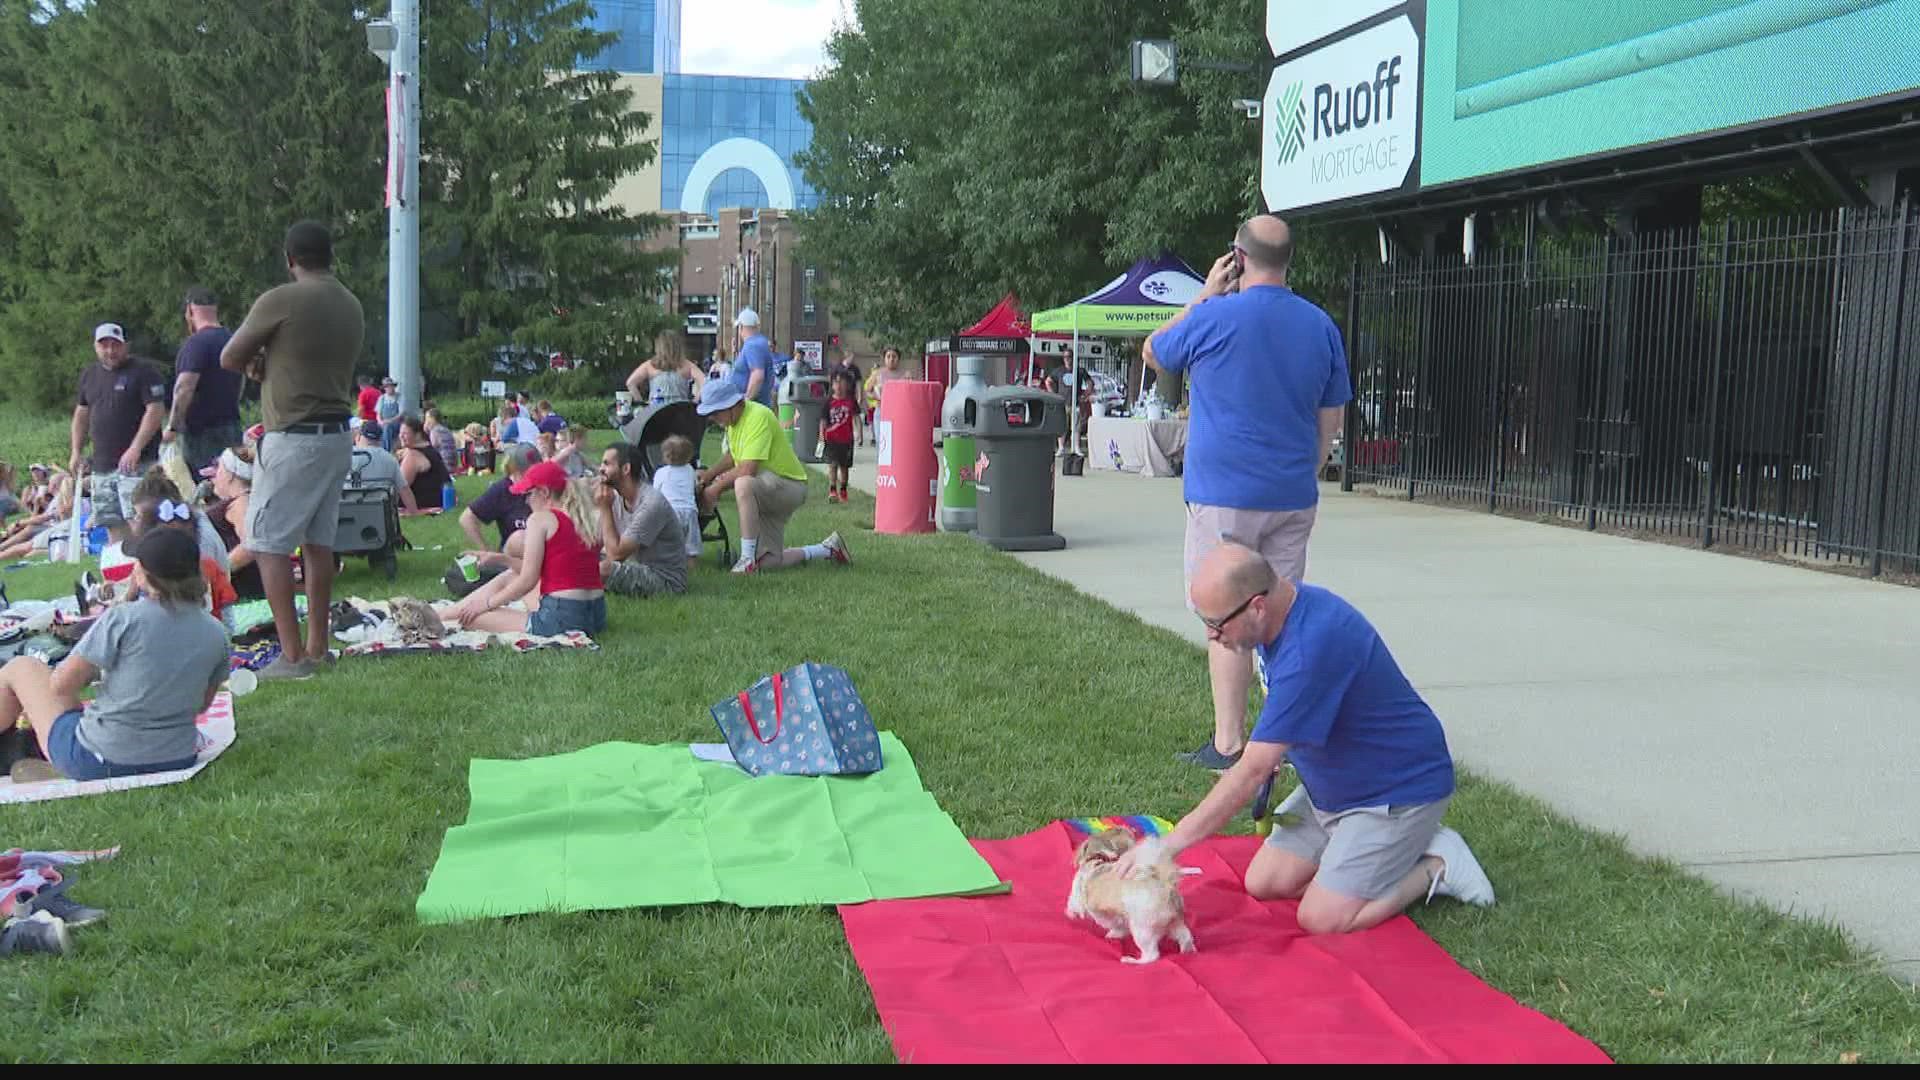 Wednesday's Indianapolis Indians game brought an audience of both dogs and their owners.